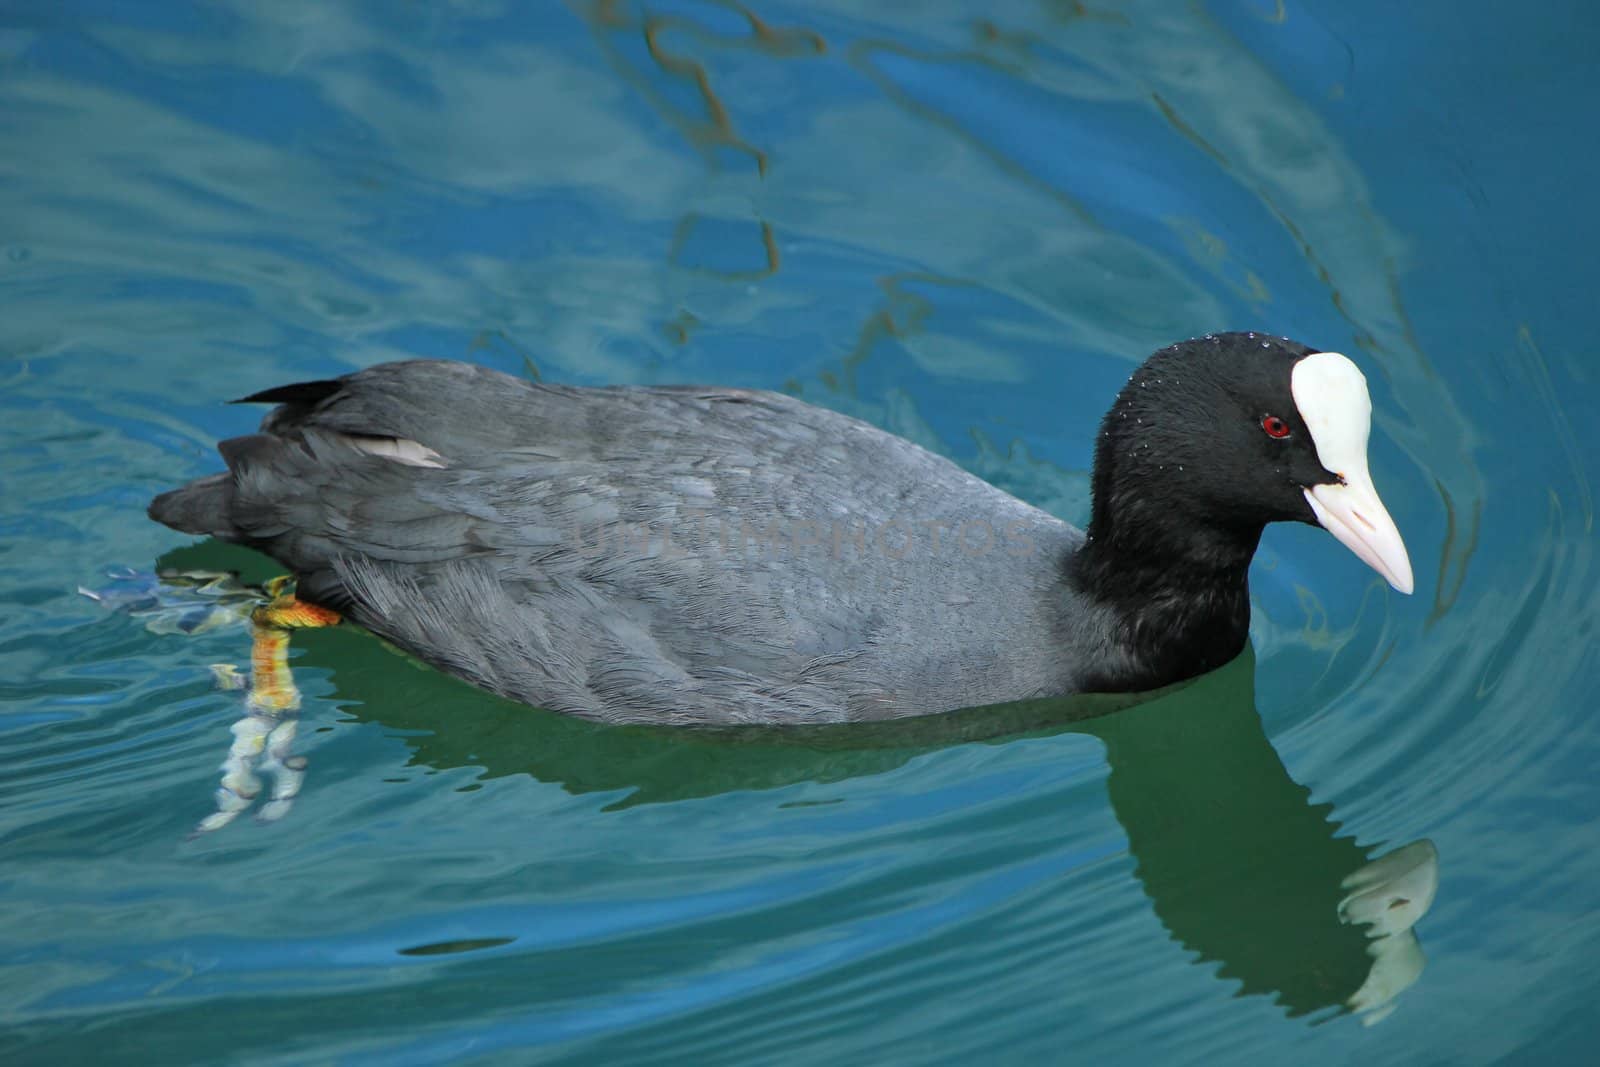 Coot on water by Elenaphotos21